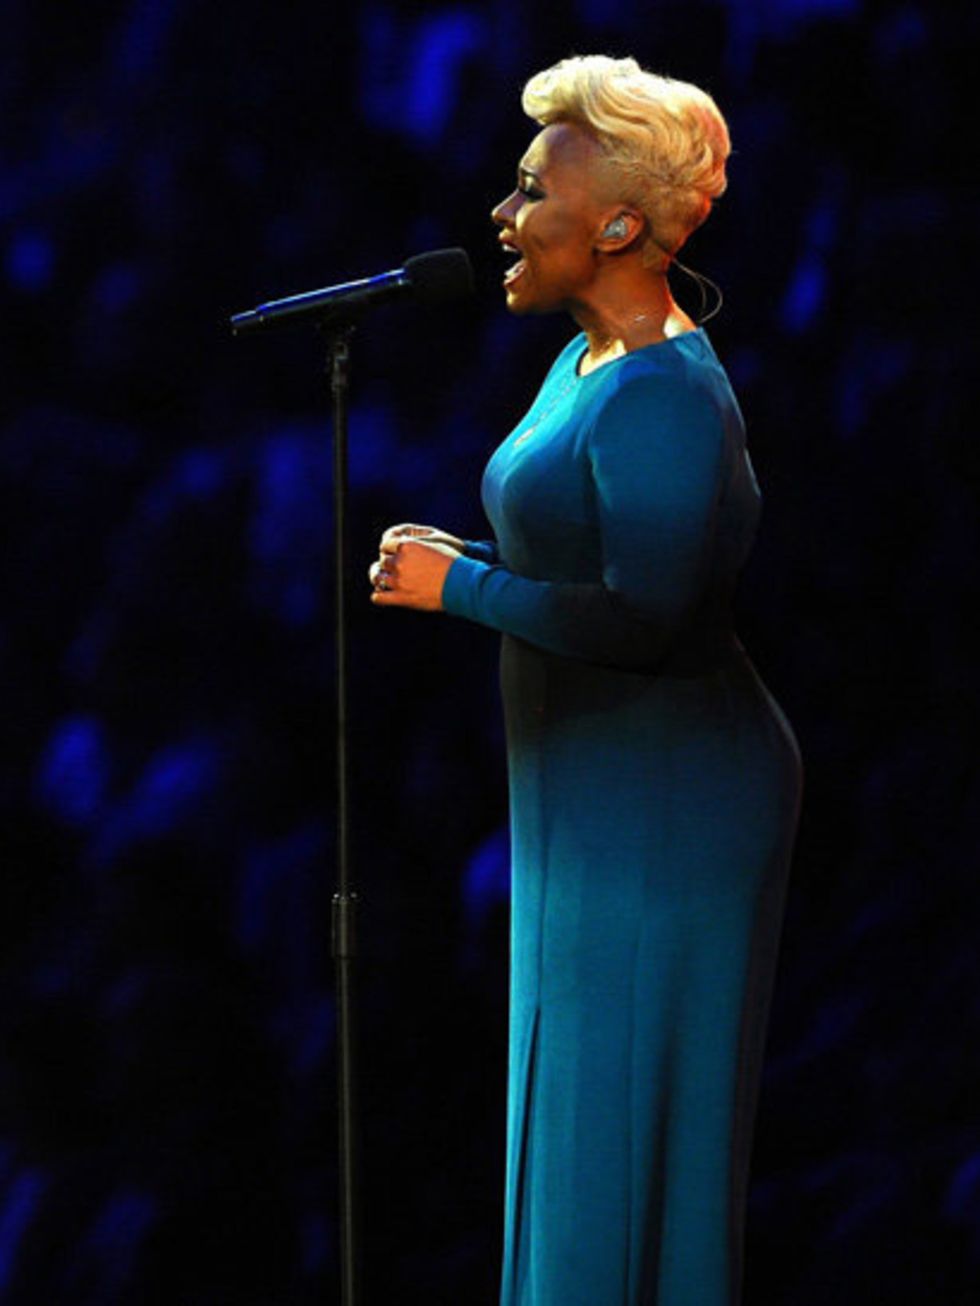 <p>ELLE Style Awards 2012 singer Emeli Sande wearing <a href="http://www.elleuk.com/catwalk/designer-a-z/jonathan-saunders/autumn-winter-2012">Jonathan Saunders</a> for her performance at the Olympic opening ceremony</p>